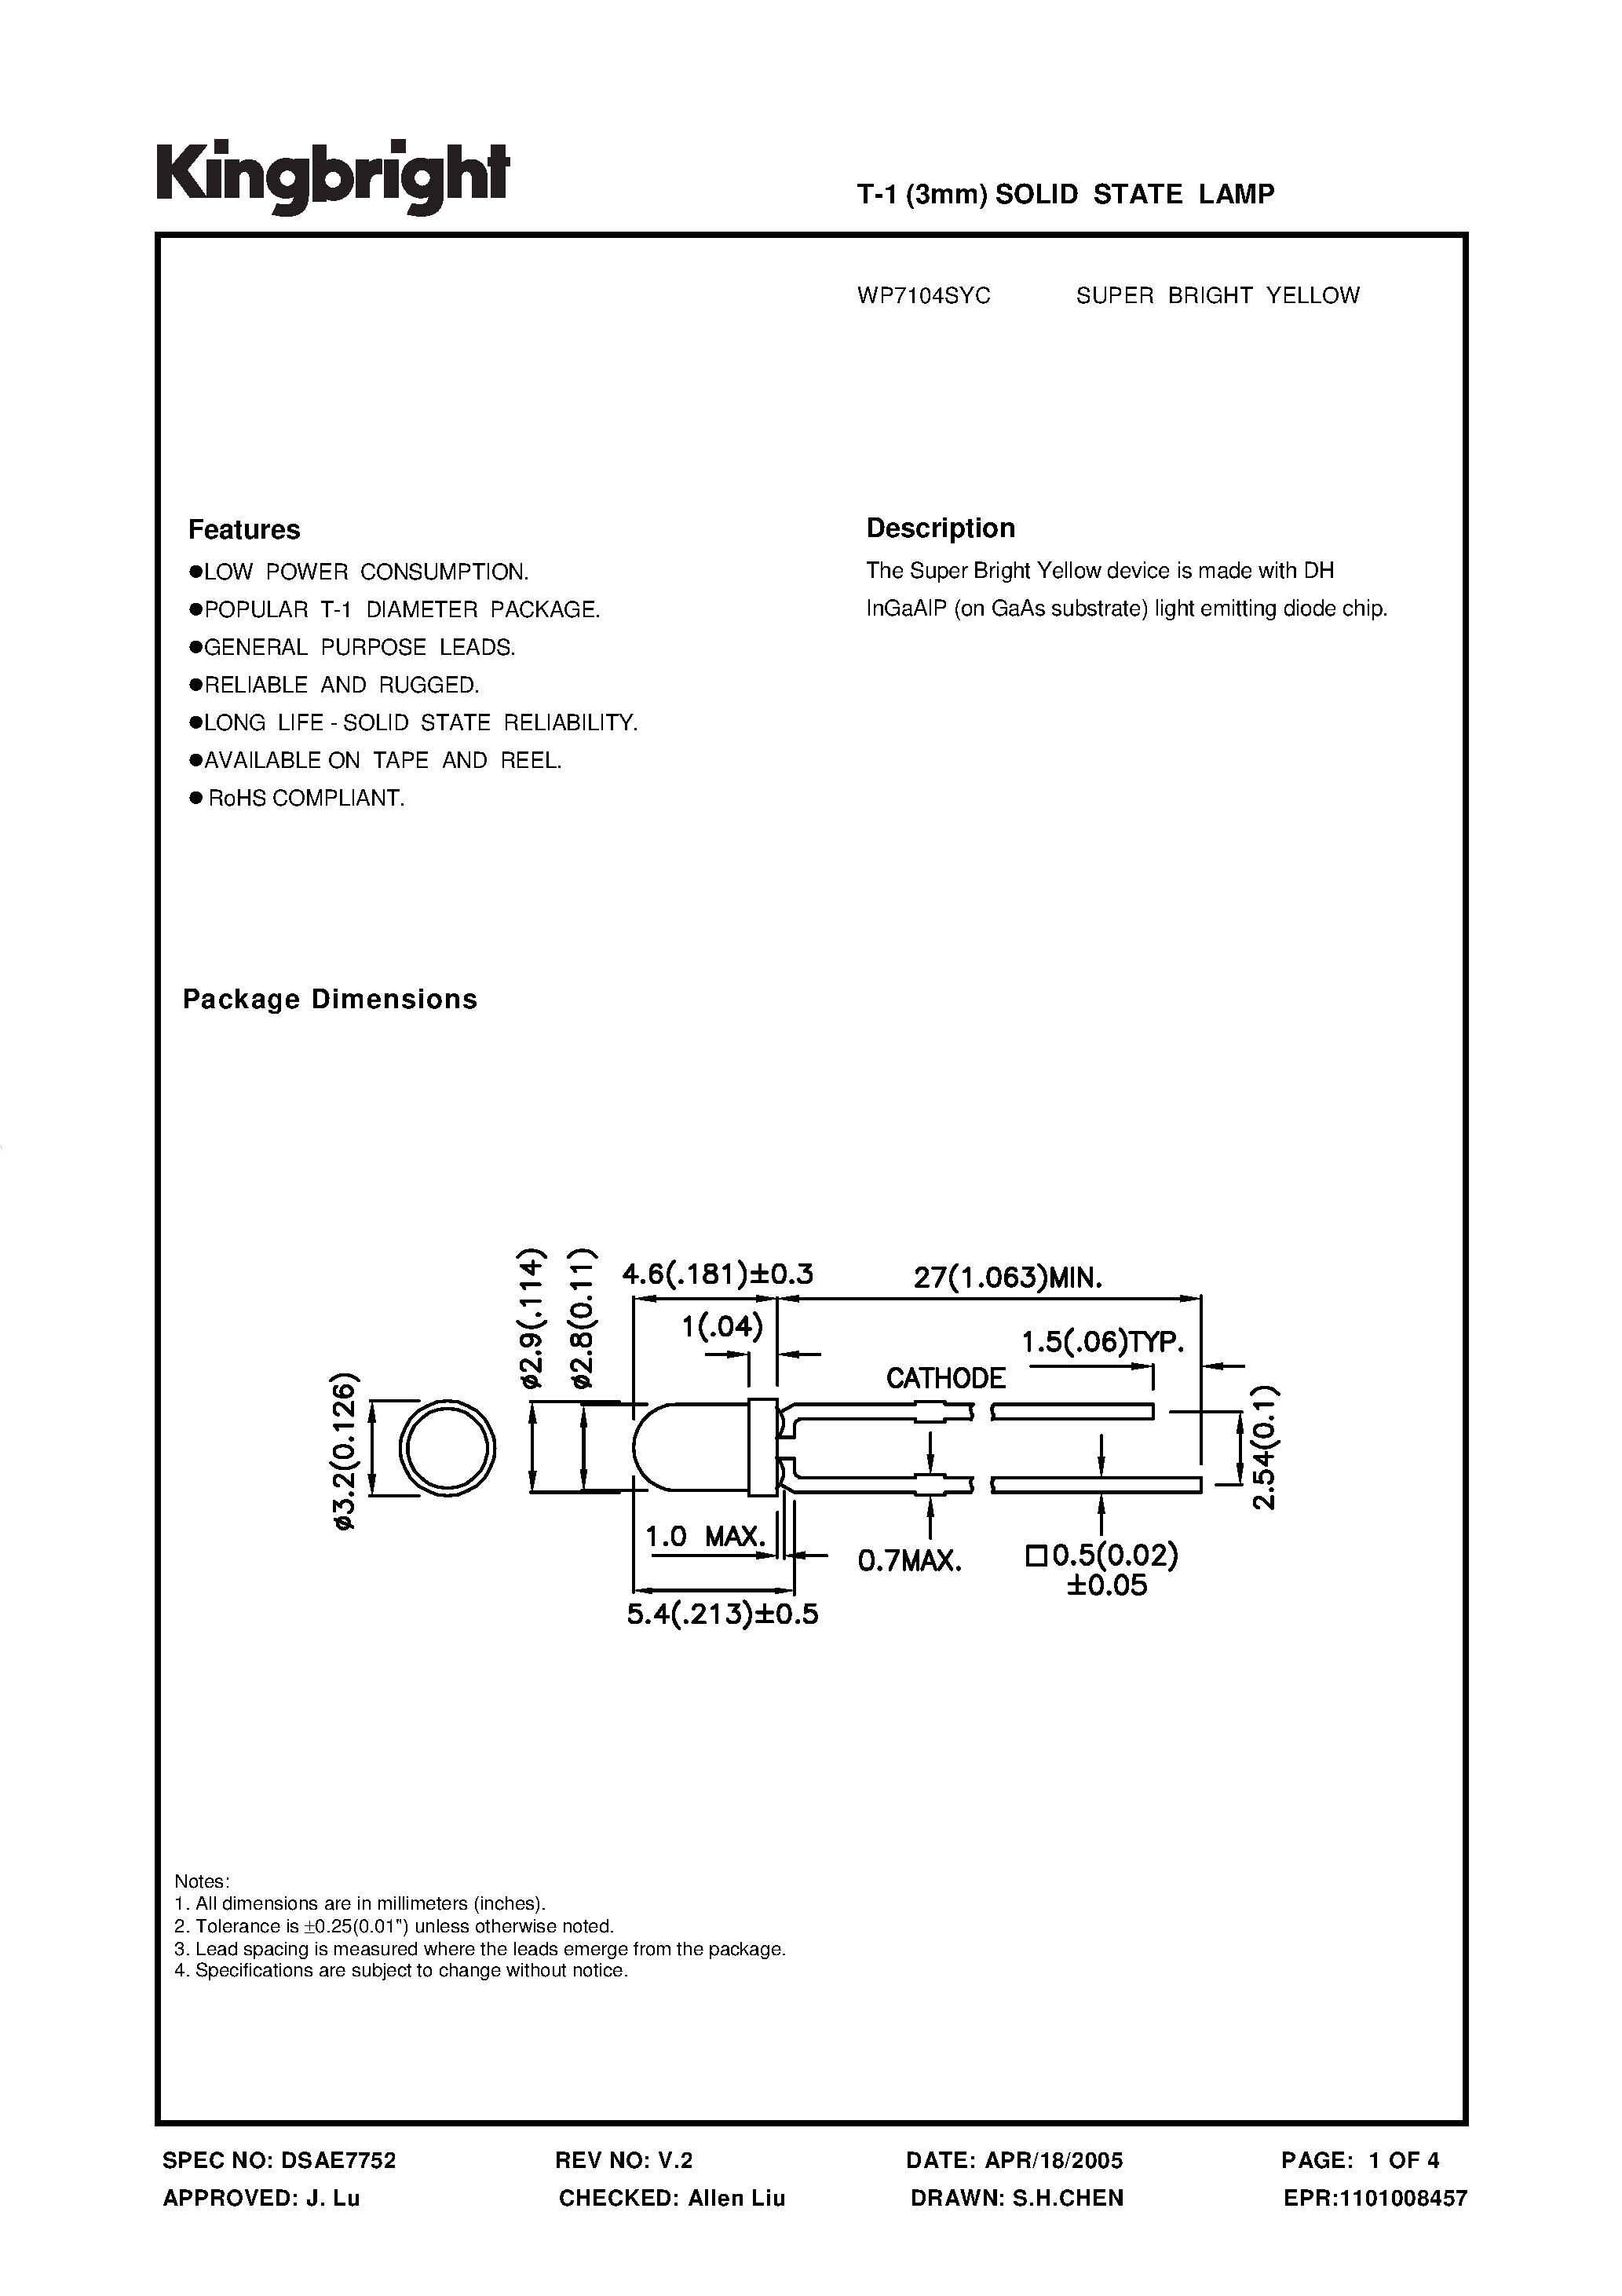 Datasheet WP7104SYC - SOLID STATE LAMP page 1